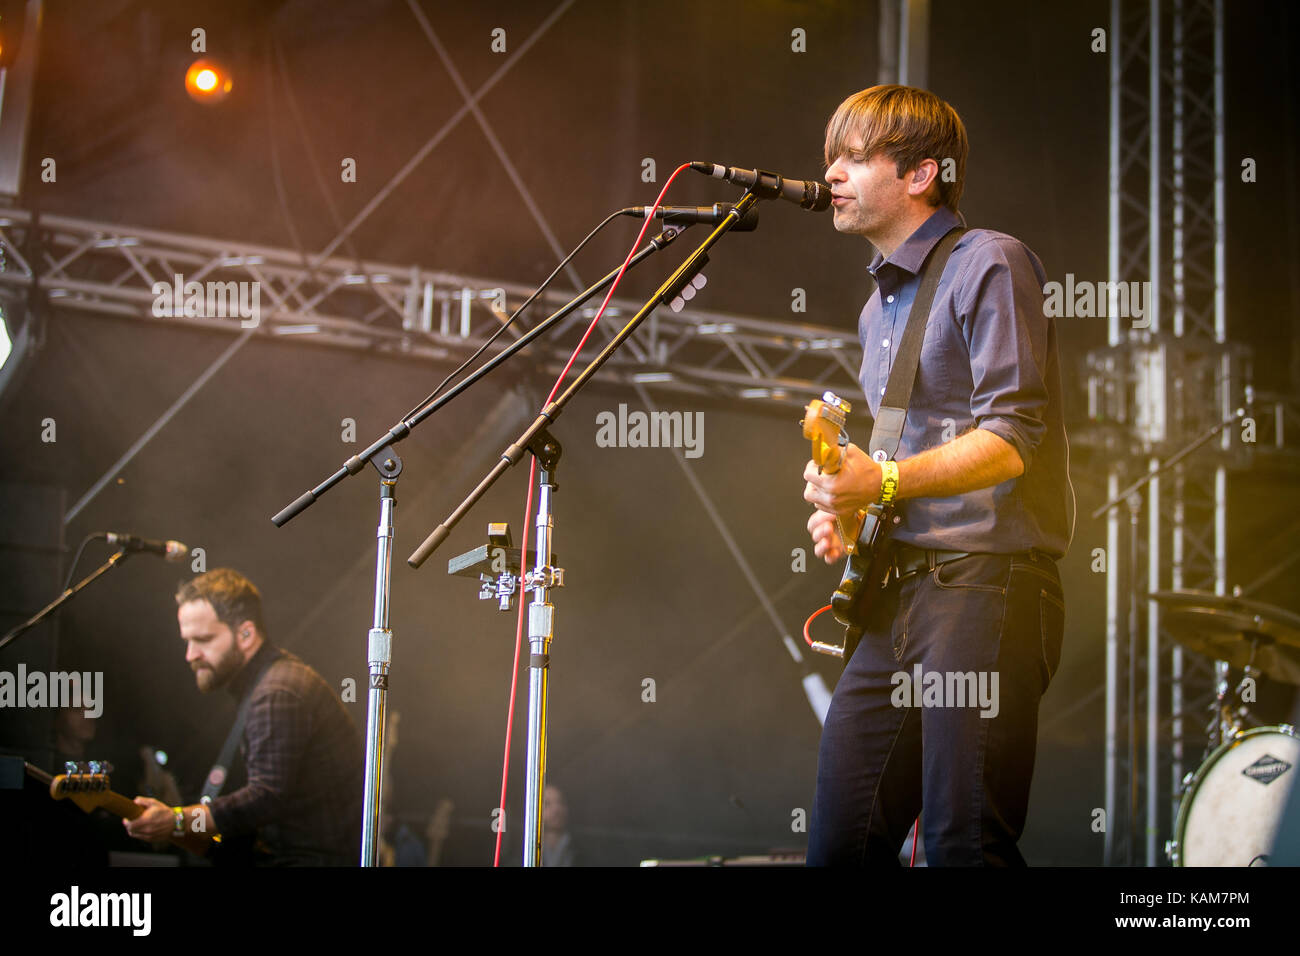 The American alternative rock band Death Cab For Cutie performs a live concert at the Norwegian music festival Bergenfest 2015 in Bergen. Here singer and musician Ben Gibbard is pictured live on stage. Norway, 14/06 2015. Stock Photo